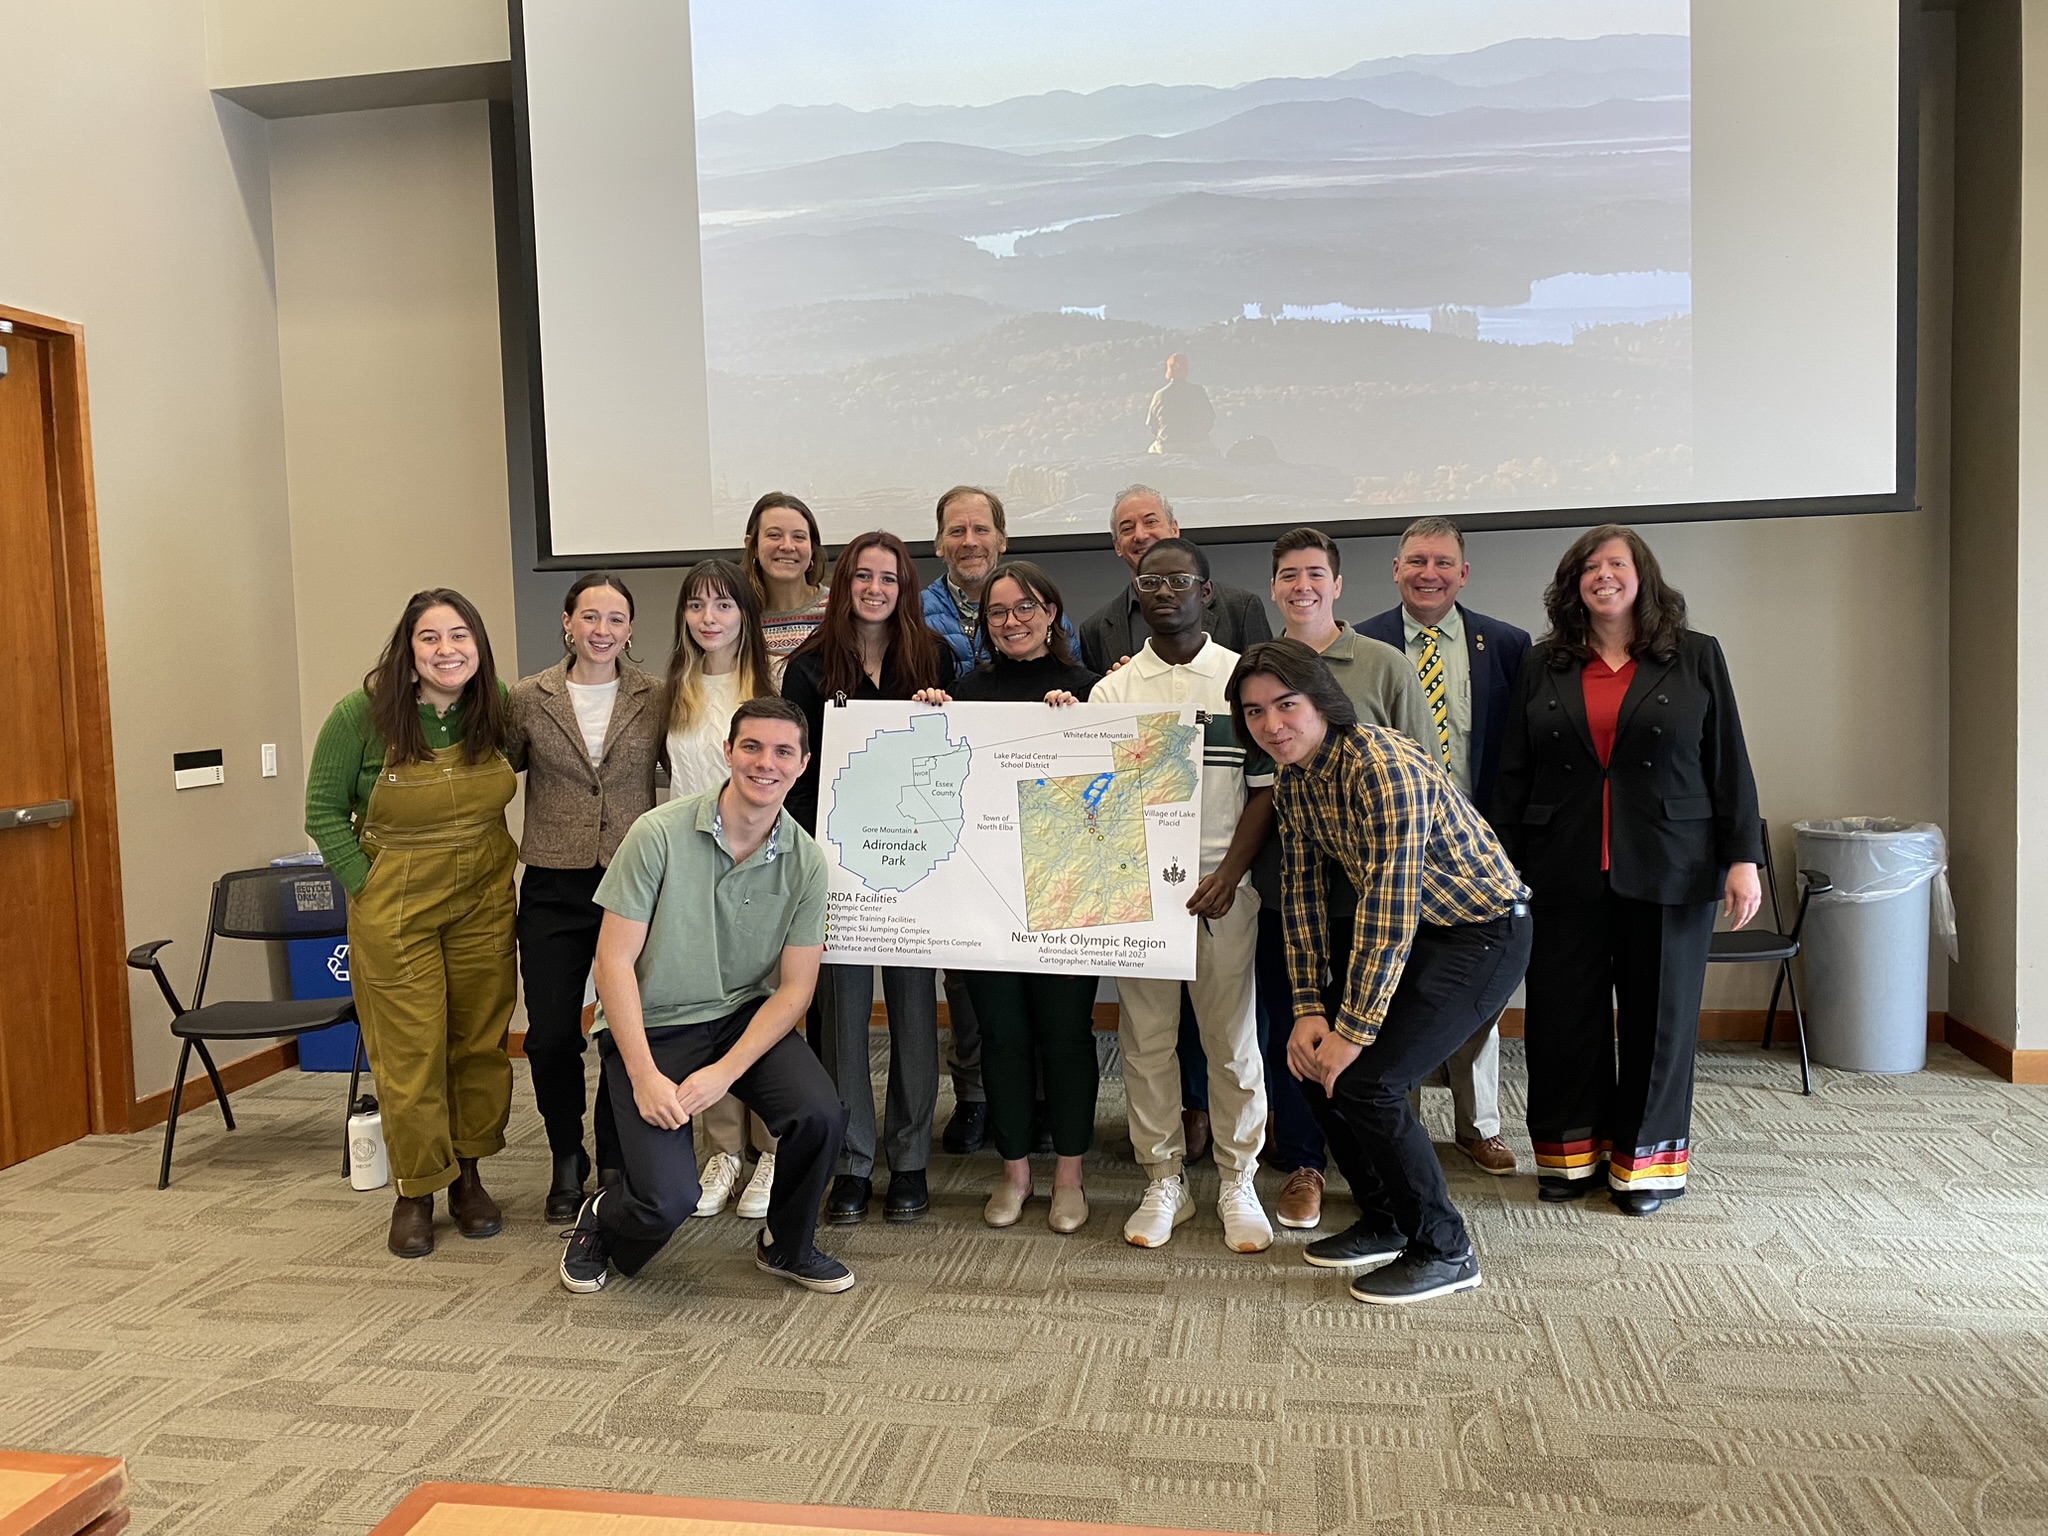 Students from Clarkson's Adirondack Semester pose for a photo to display a research poster on the Clarkson University campus